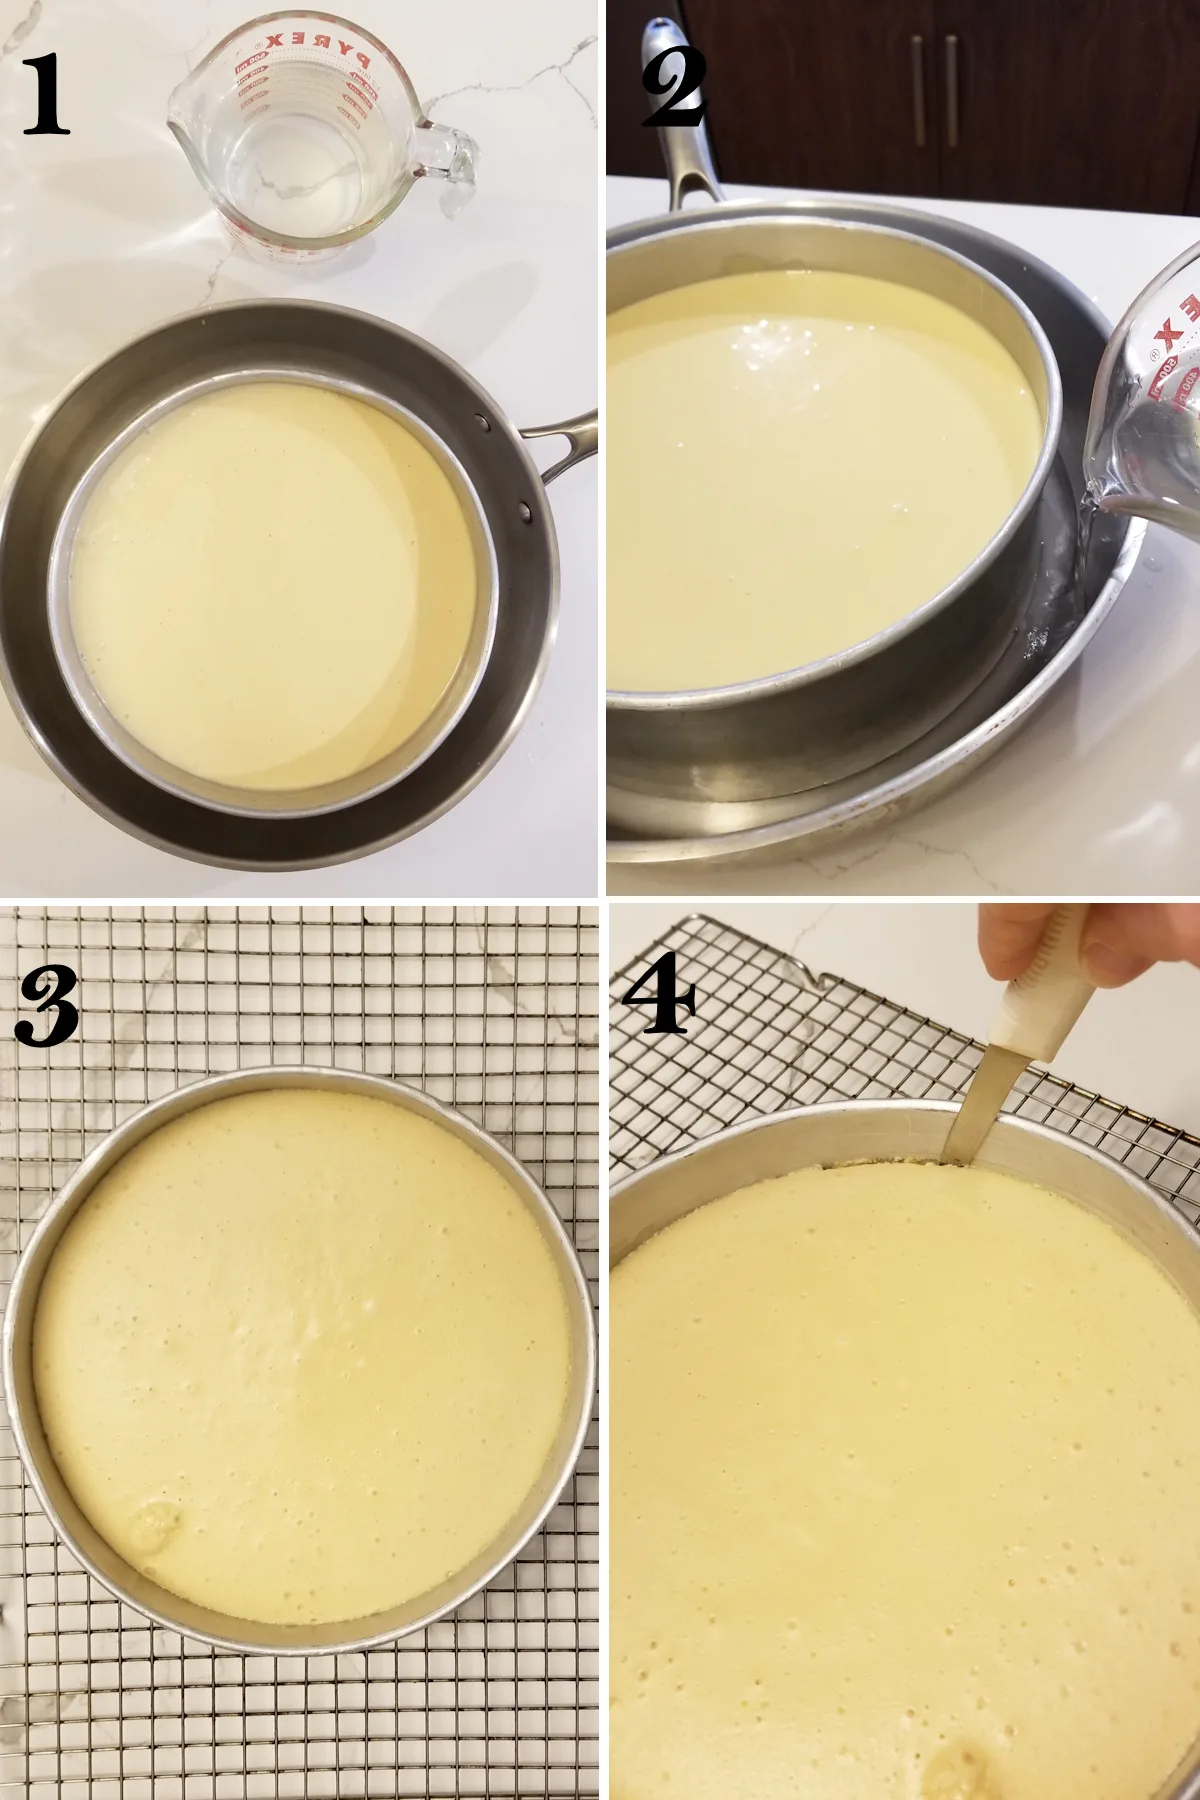 1. A cheesecake pan in a larger pan. 2. Pouring water into larger pan. 3. Cheesecake on a cooling rack. 4. A knife scraping between cheesecake and pan.